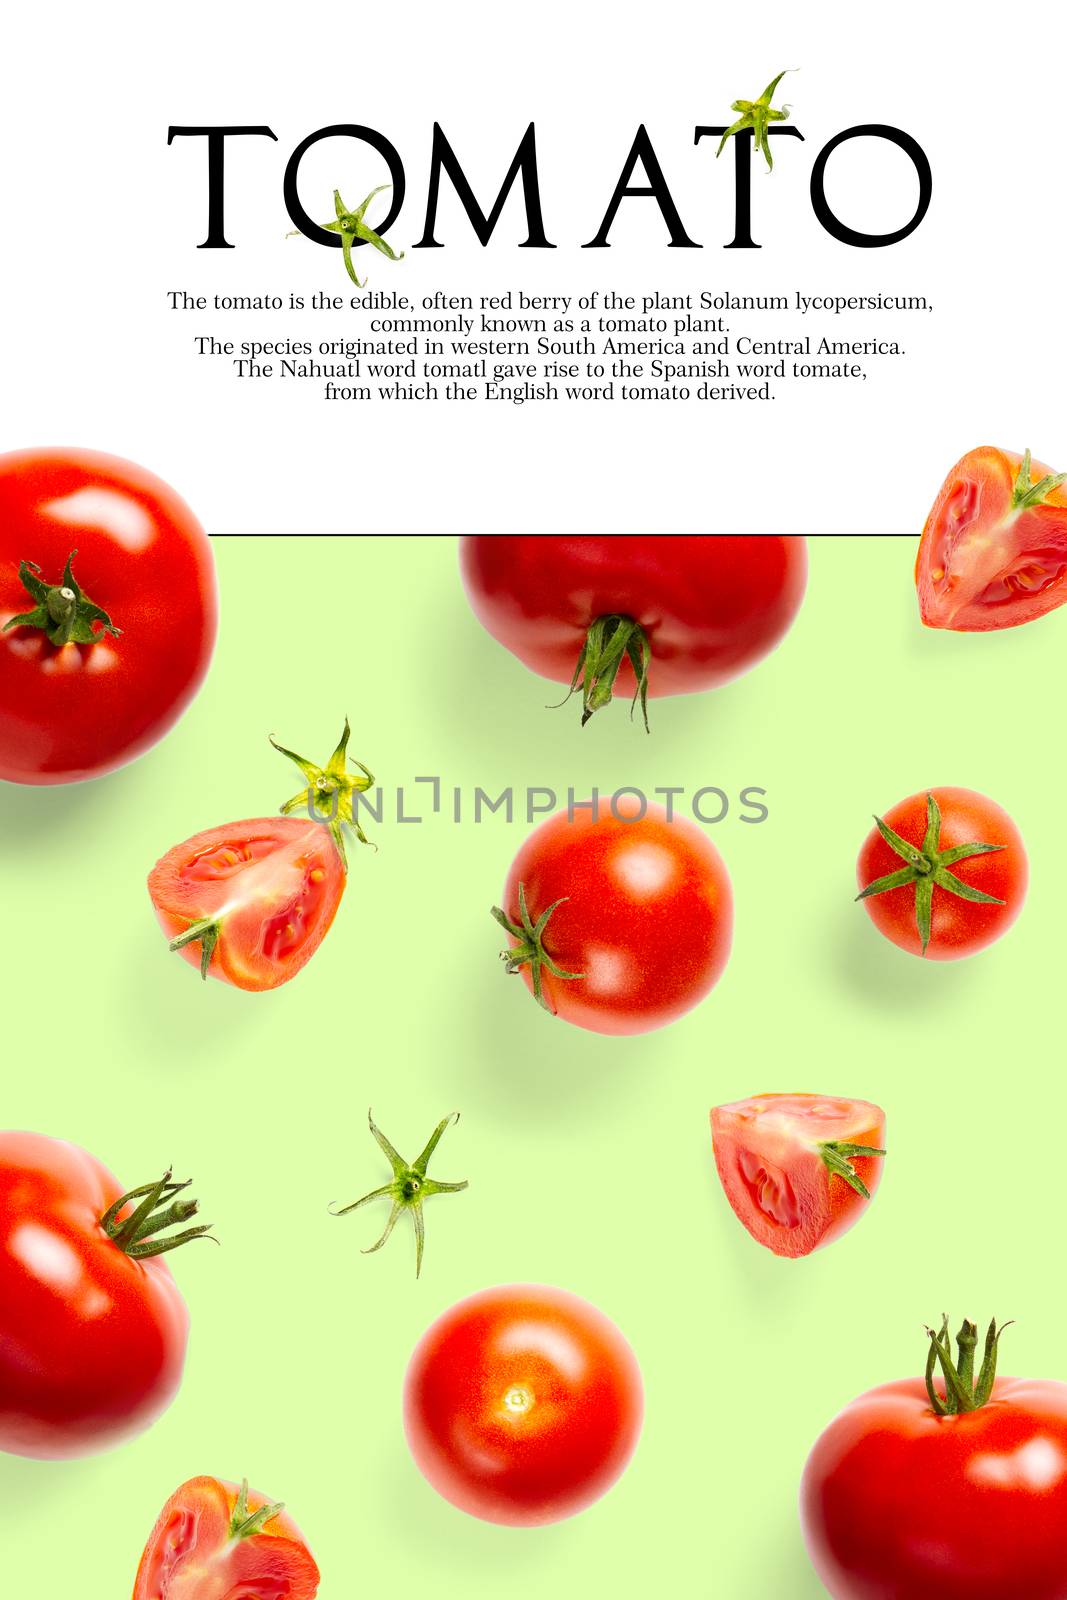 Creative layout made of tomato on the green background. Creative flat lay set of tomatoes with simple text on white background, copy space. tomato theme decoration design or vegetarianism concept.